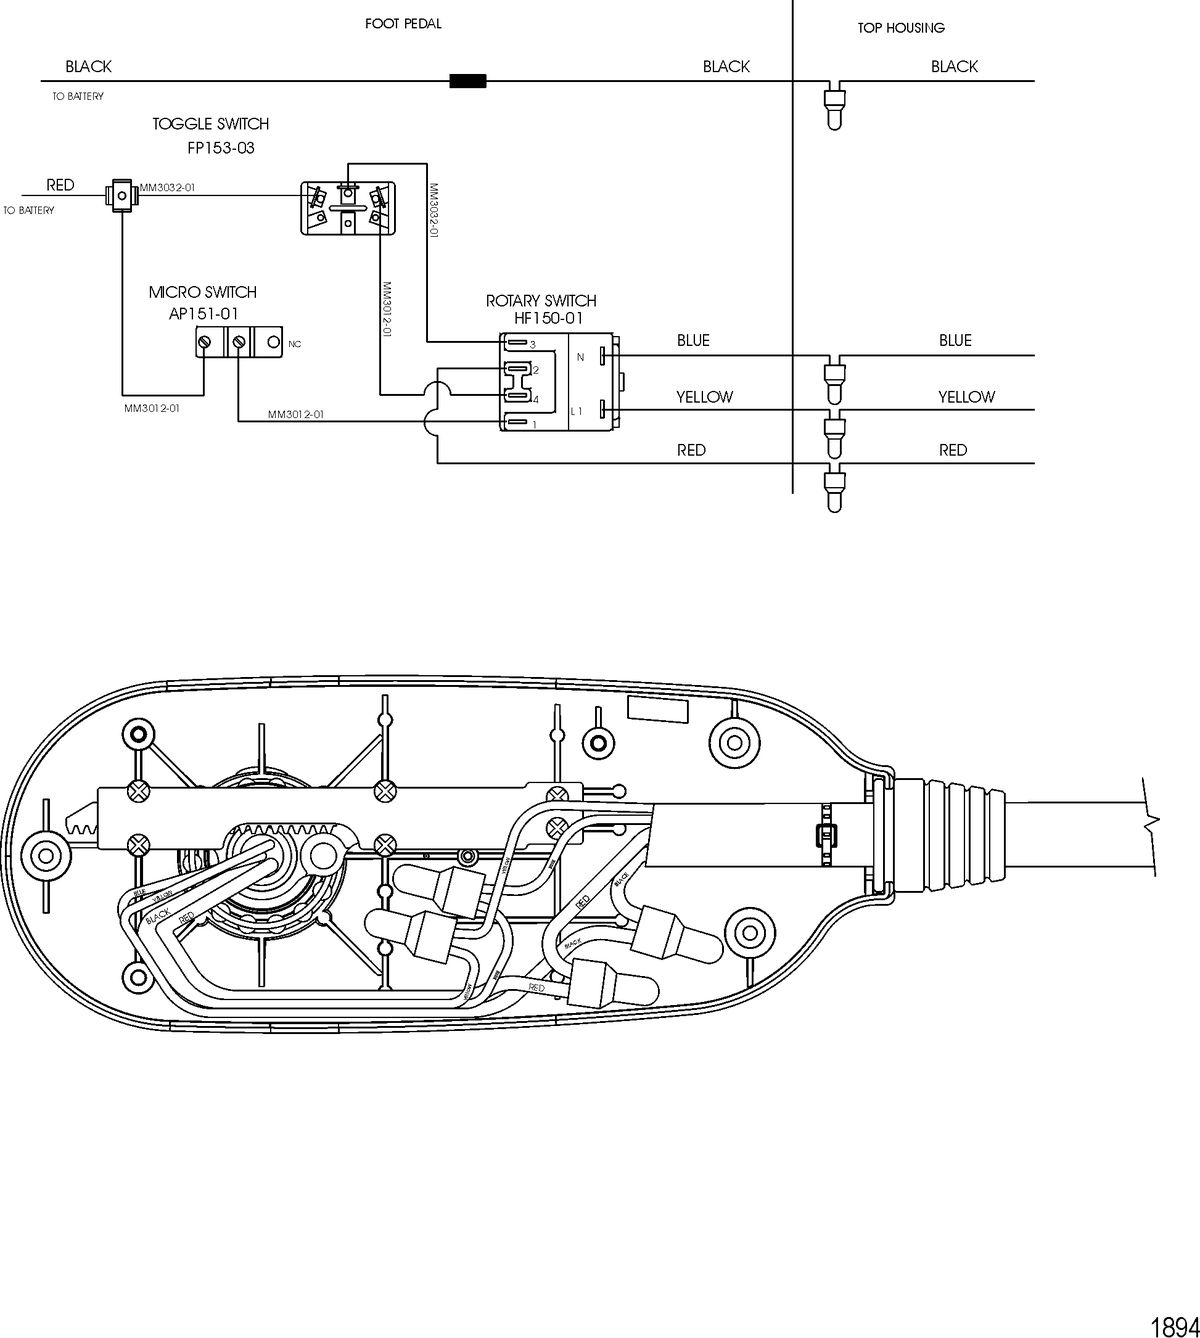 TROLLING MOTOR MOTORGUIDE PRO AND TRACKER SERIES Wire Diagram(Model MP4300) (12 Volt)